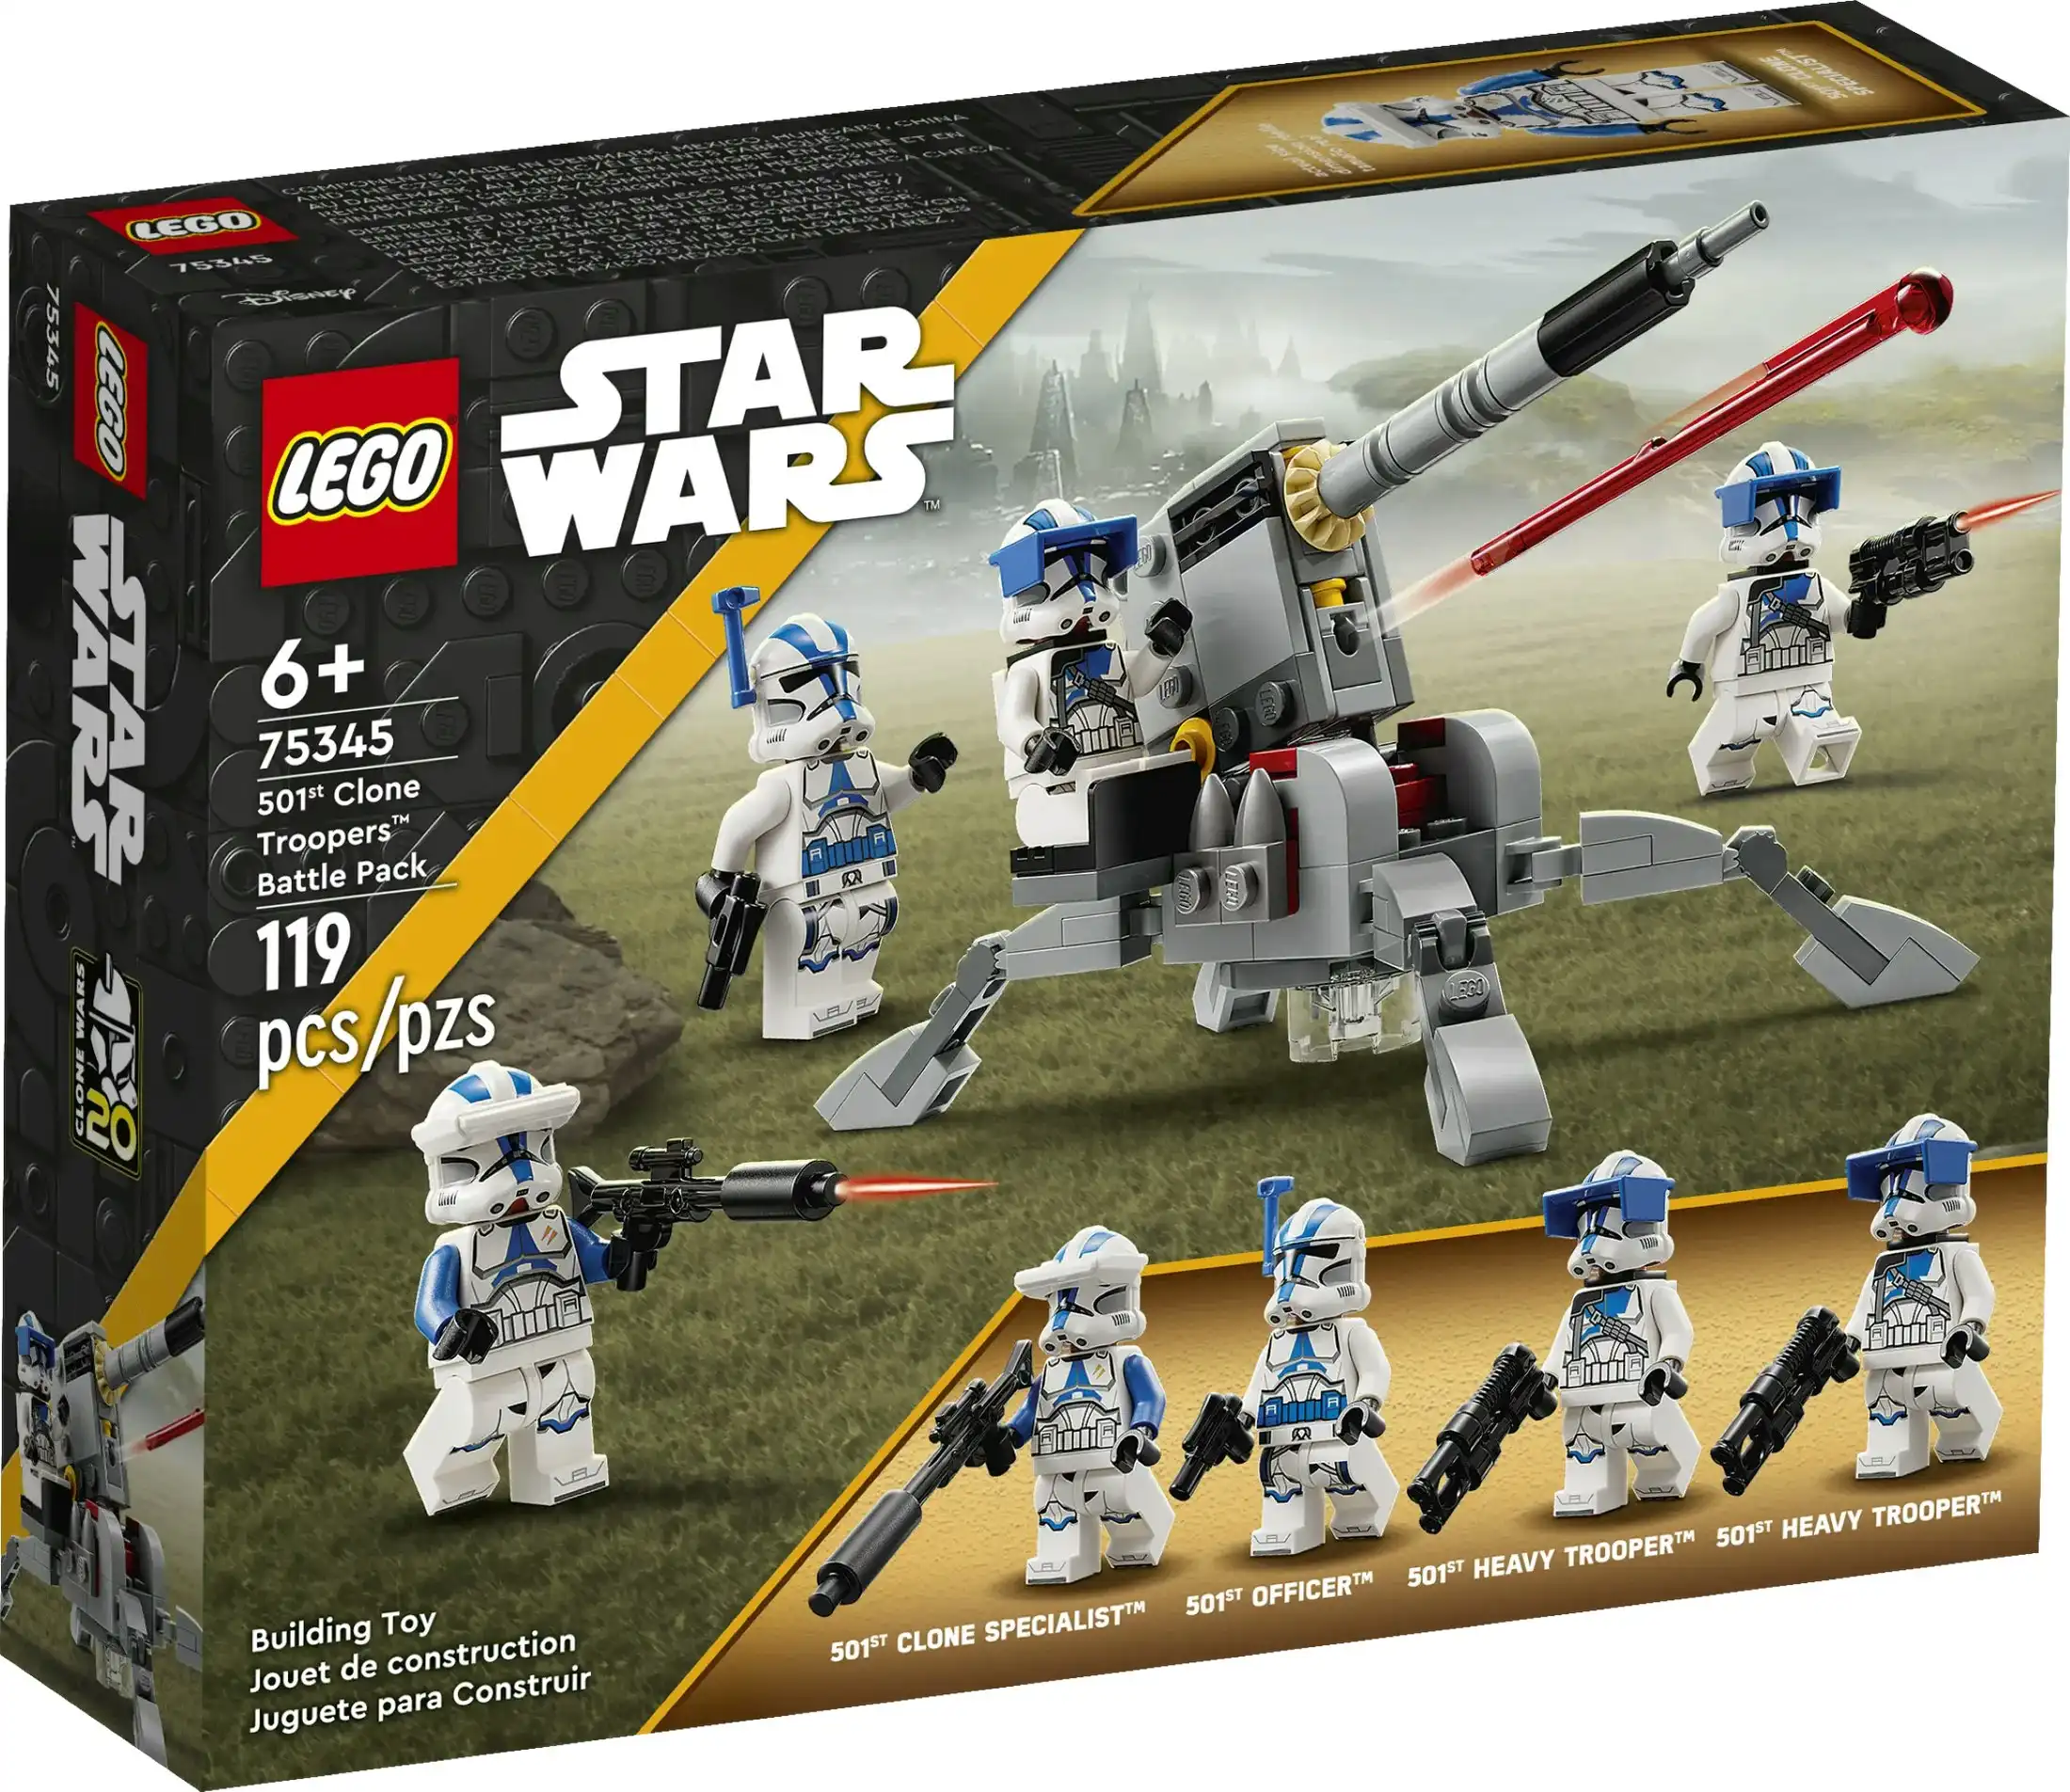 LEGO 75345 501st Clone Troopers Battle Pack - Star Wars